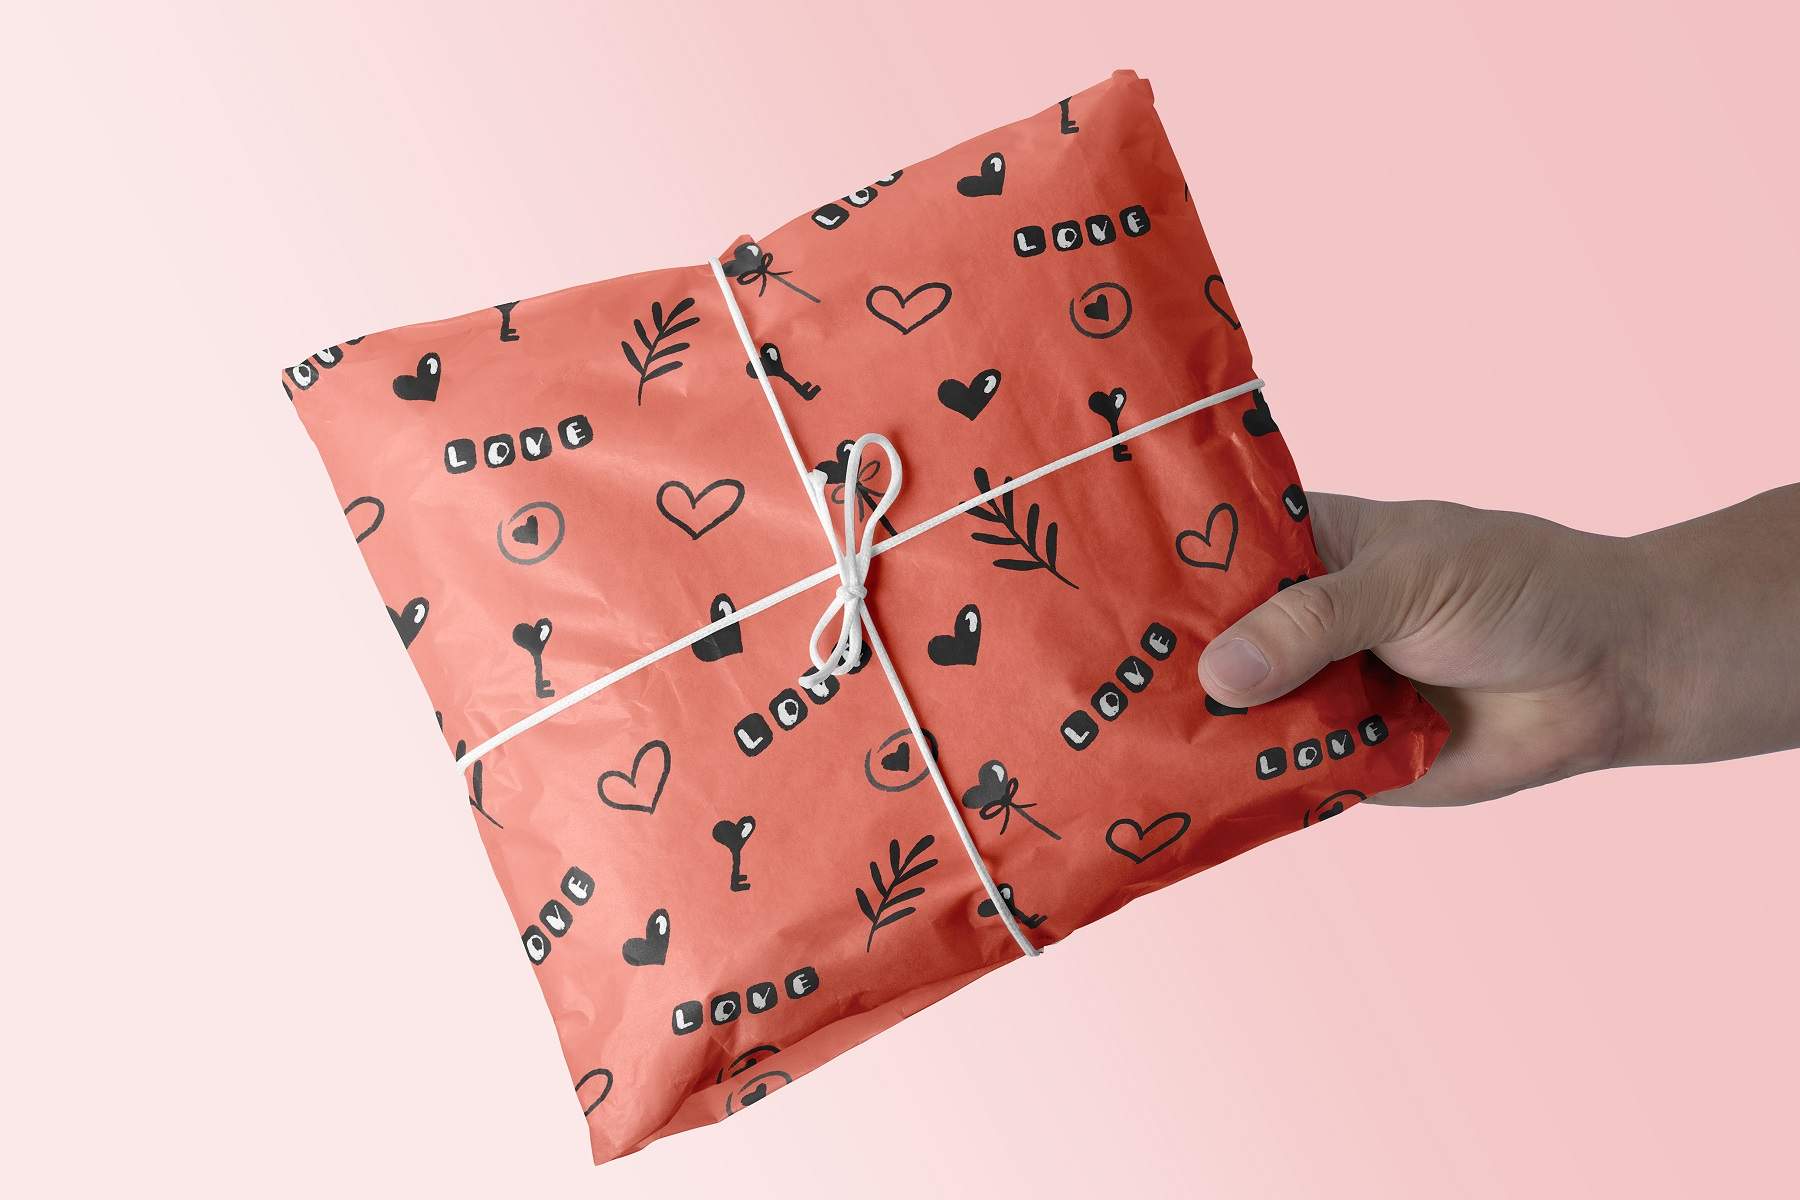 Hand holding a wrapped present on a pink background.